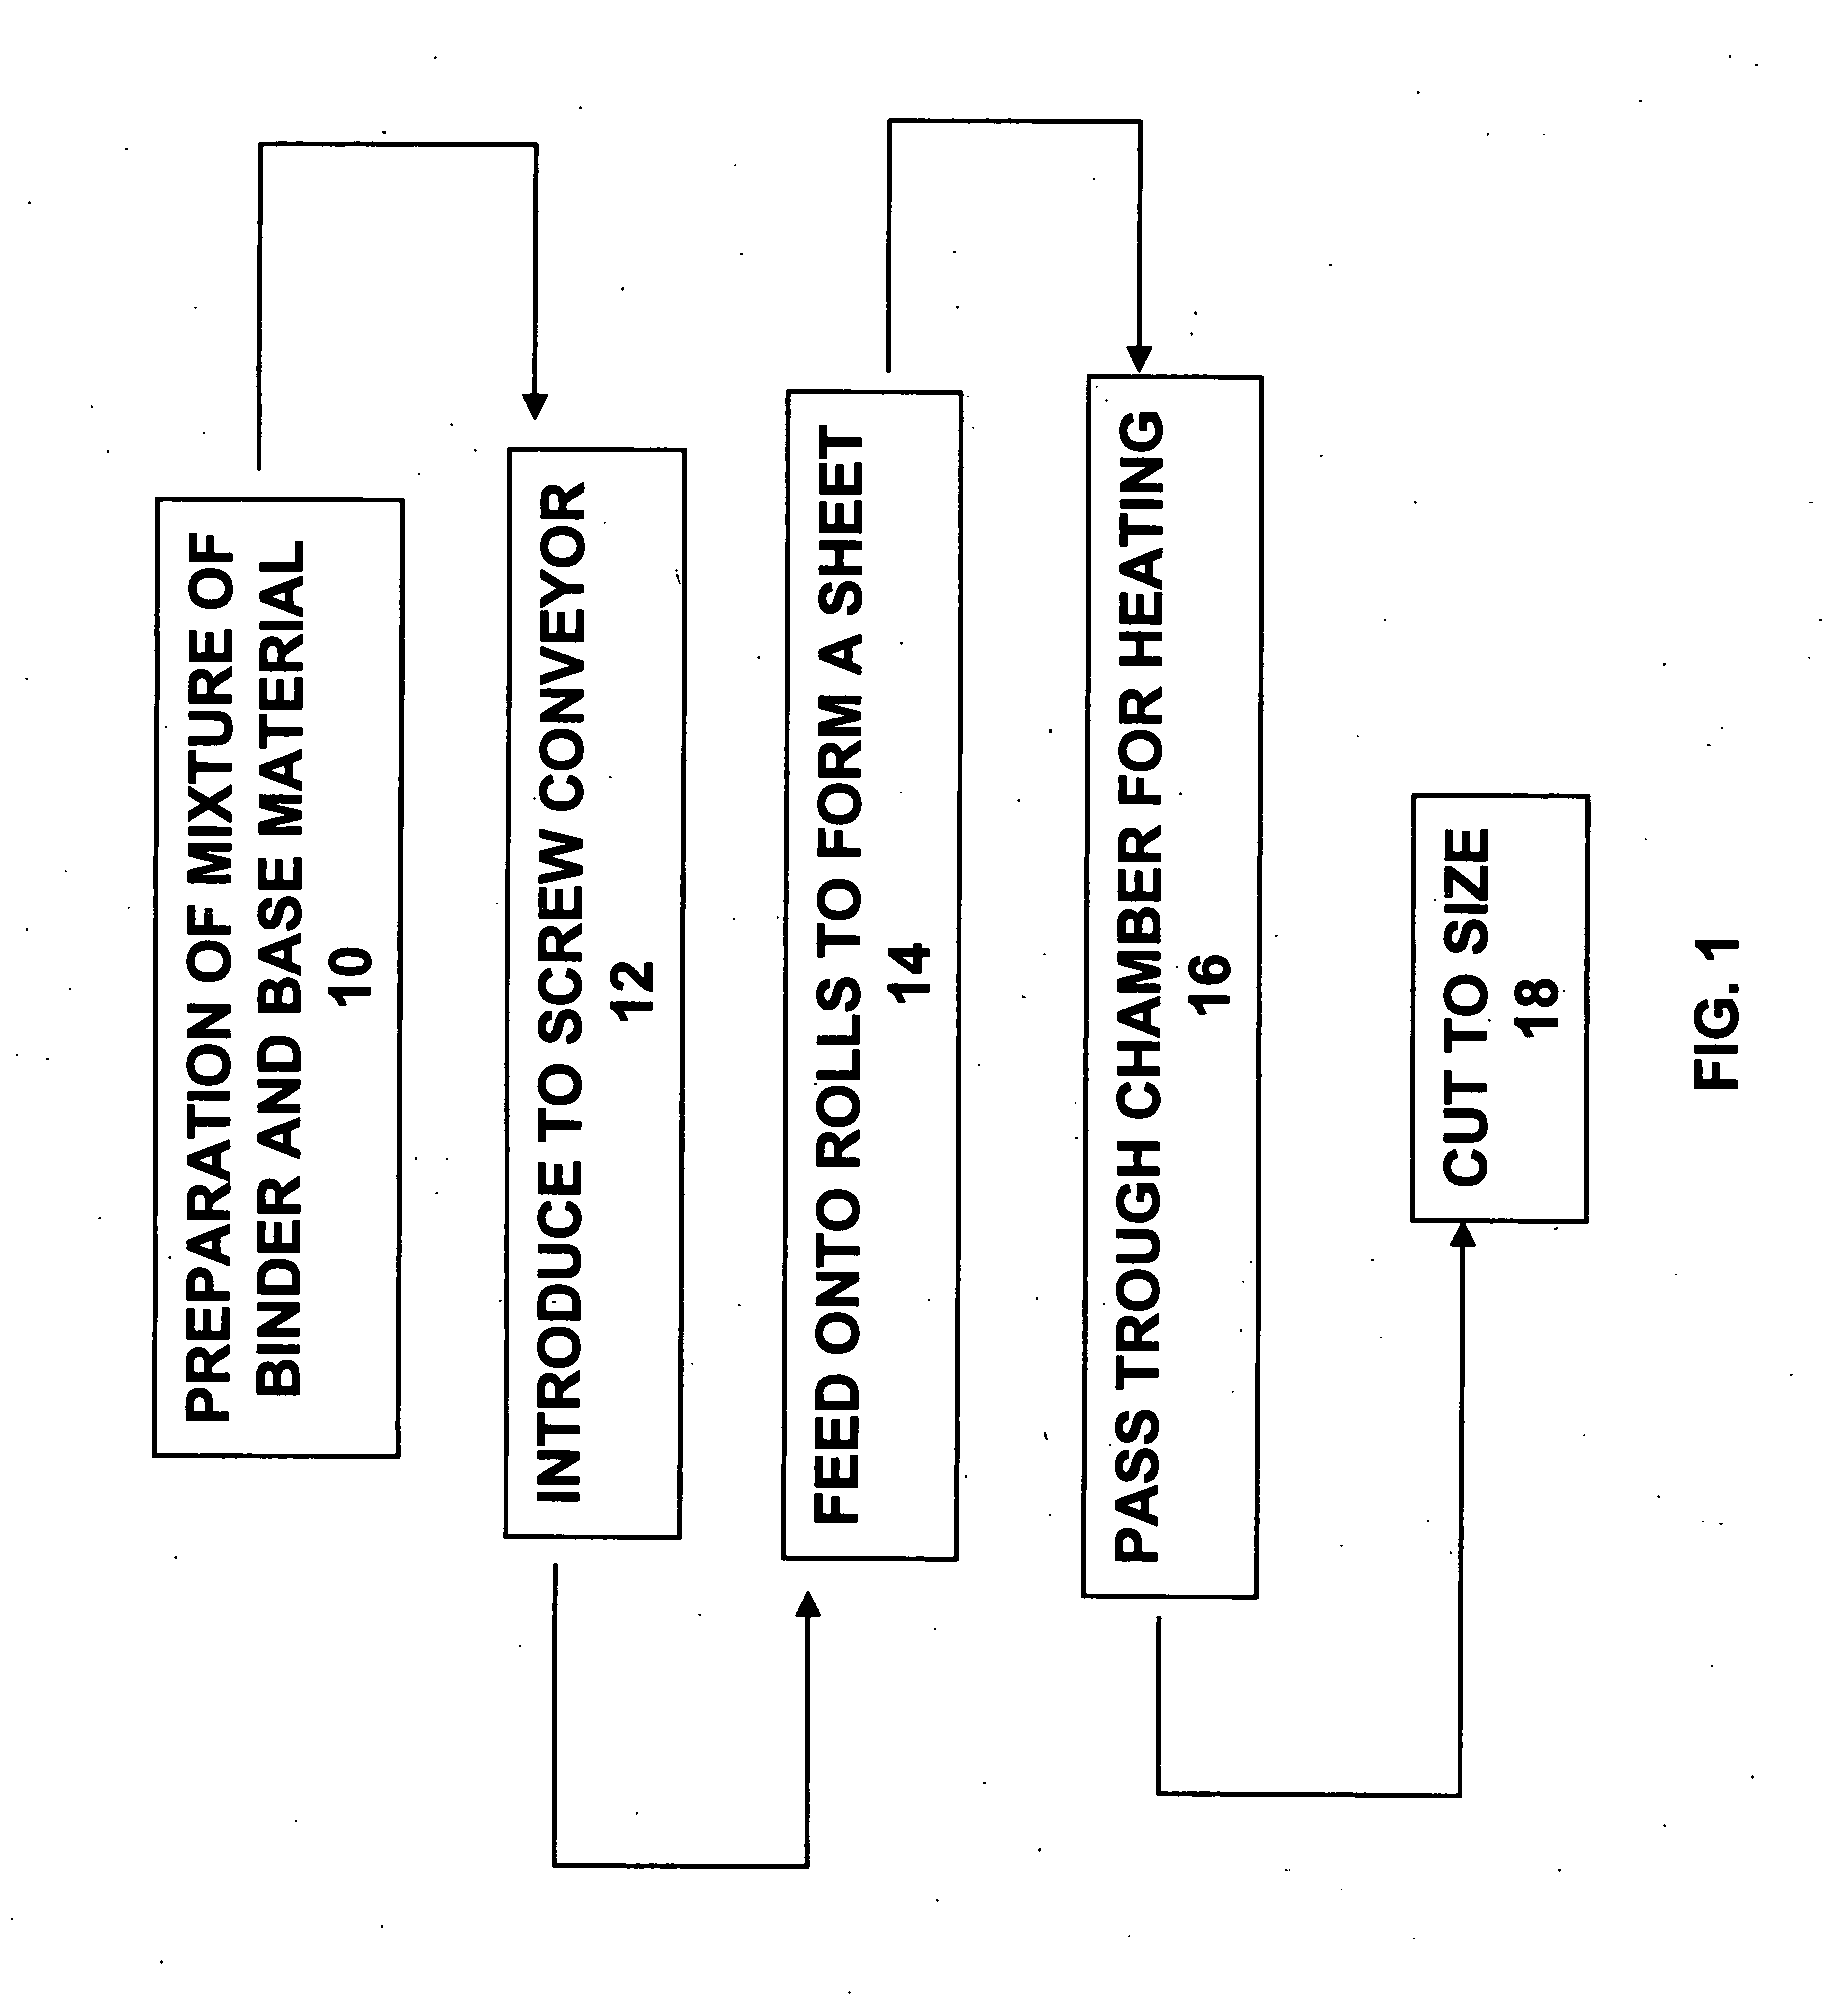 Apparatus and process for forming pet treats